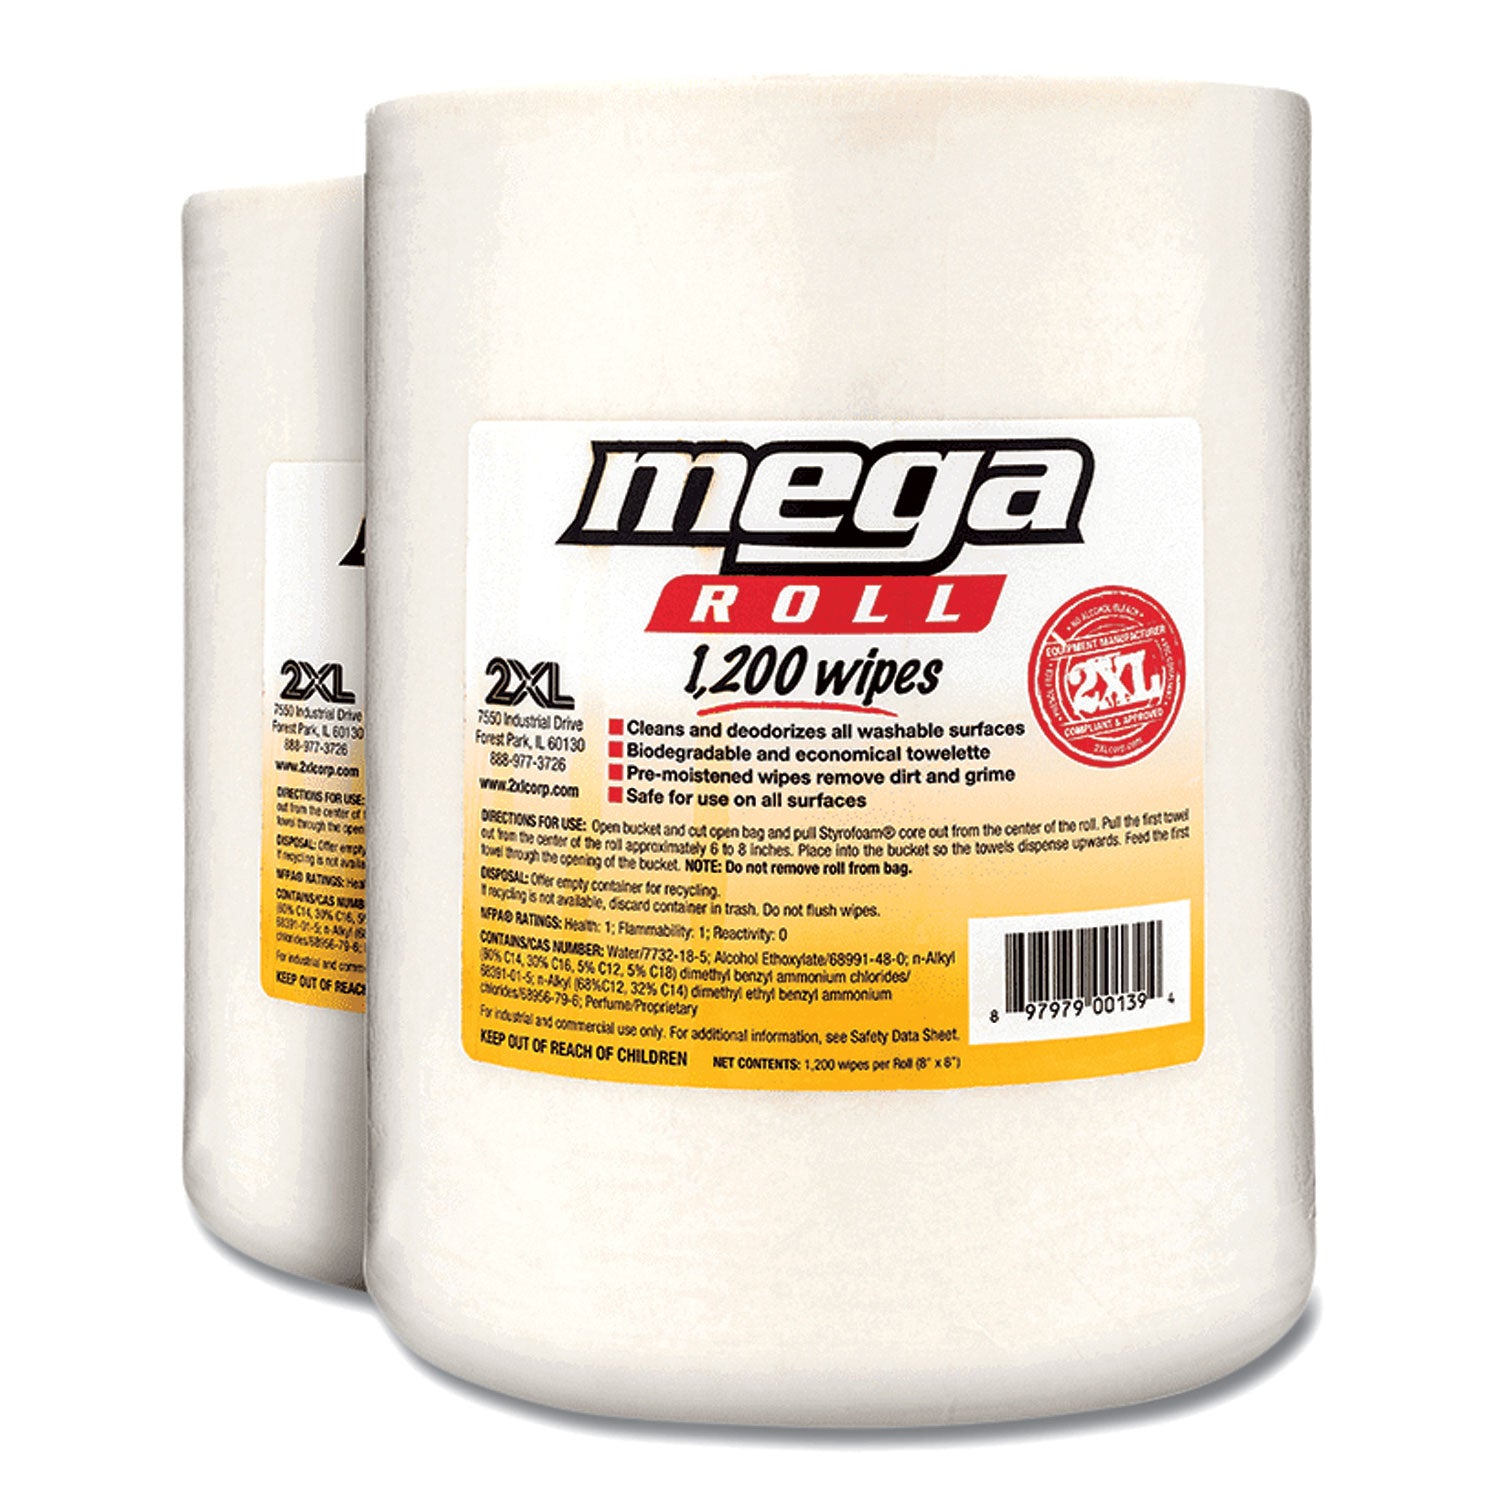 gym-wipes-mega-roll-refill-8-x-8-unscented-white-1200-roll-2-rolls-carton_txll420 - 3